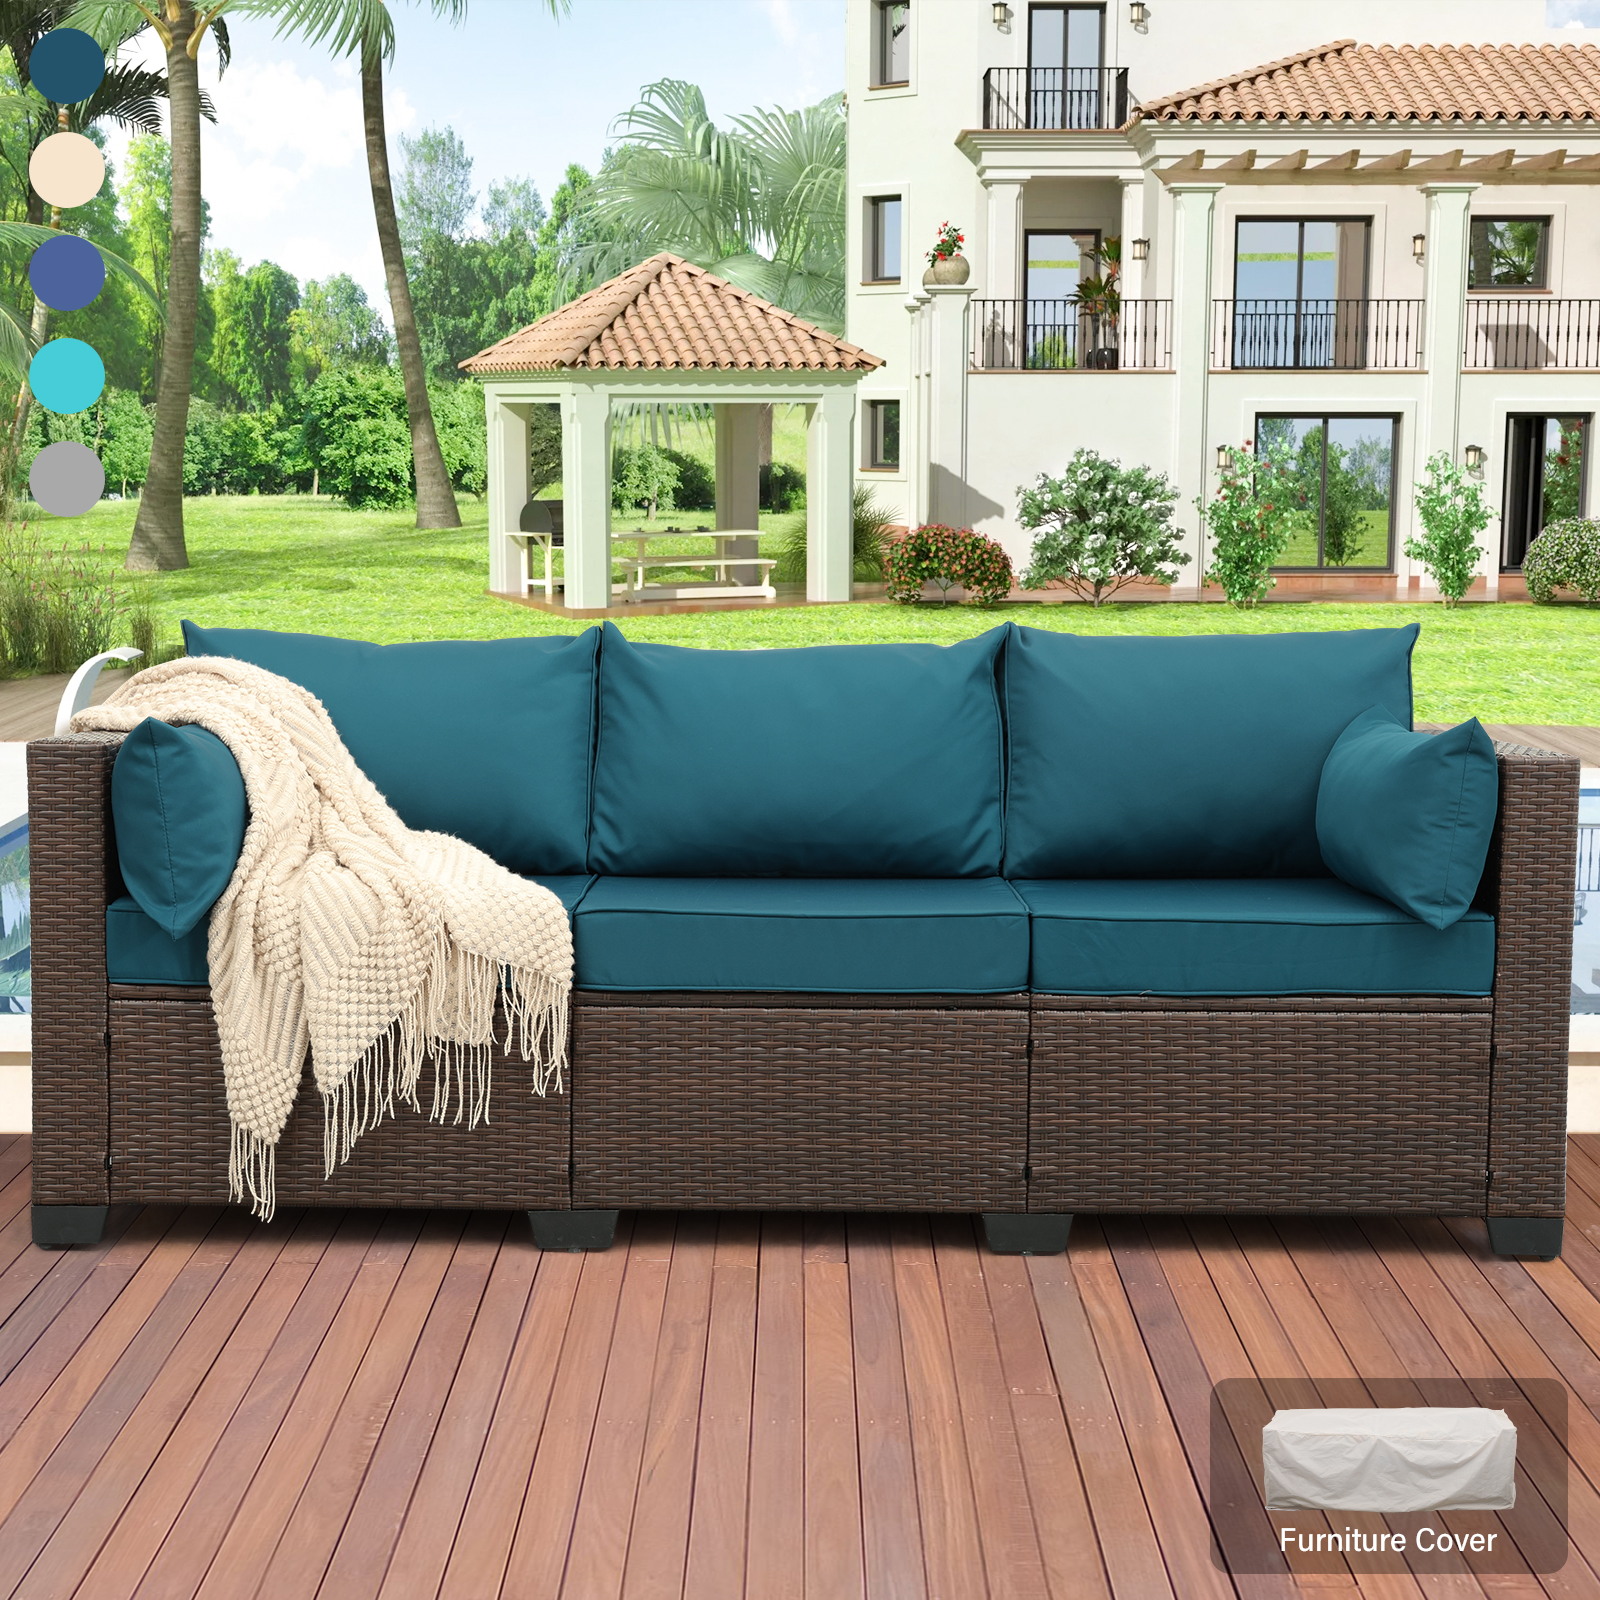 Waroom Patio 3-Seat Wicker Couch Outdoor Rattan Sofa Furniture, Peacock Blue Cushions - image 1 of 6